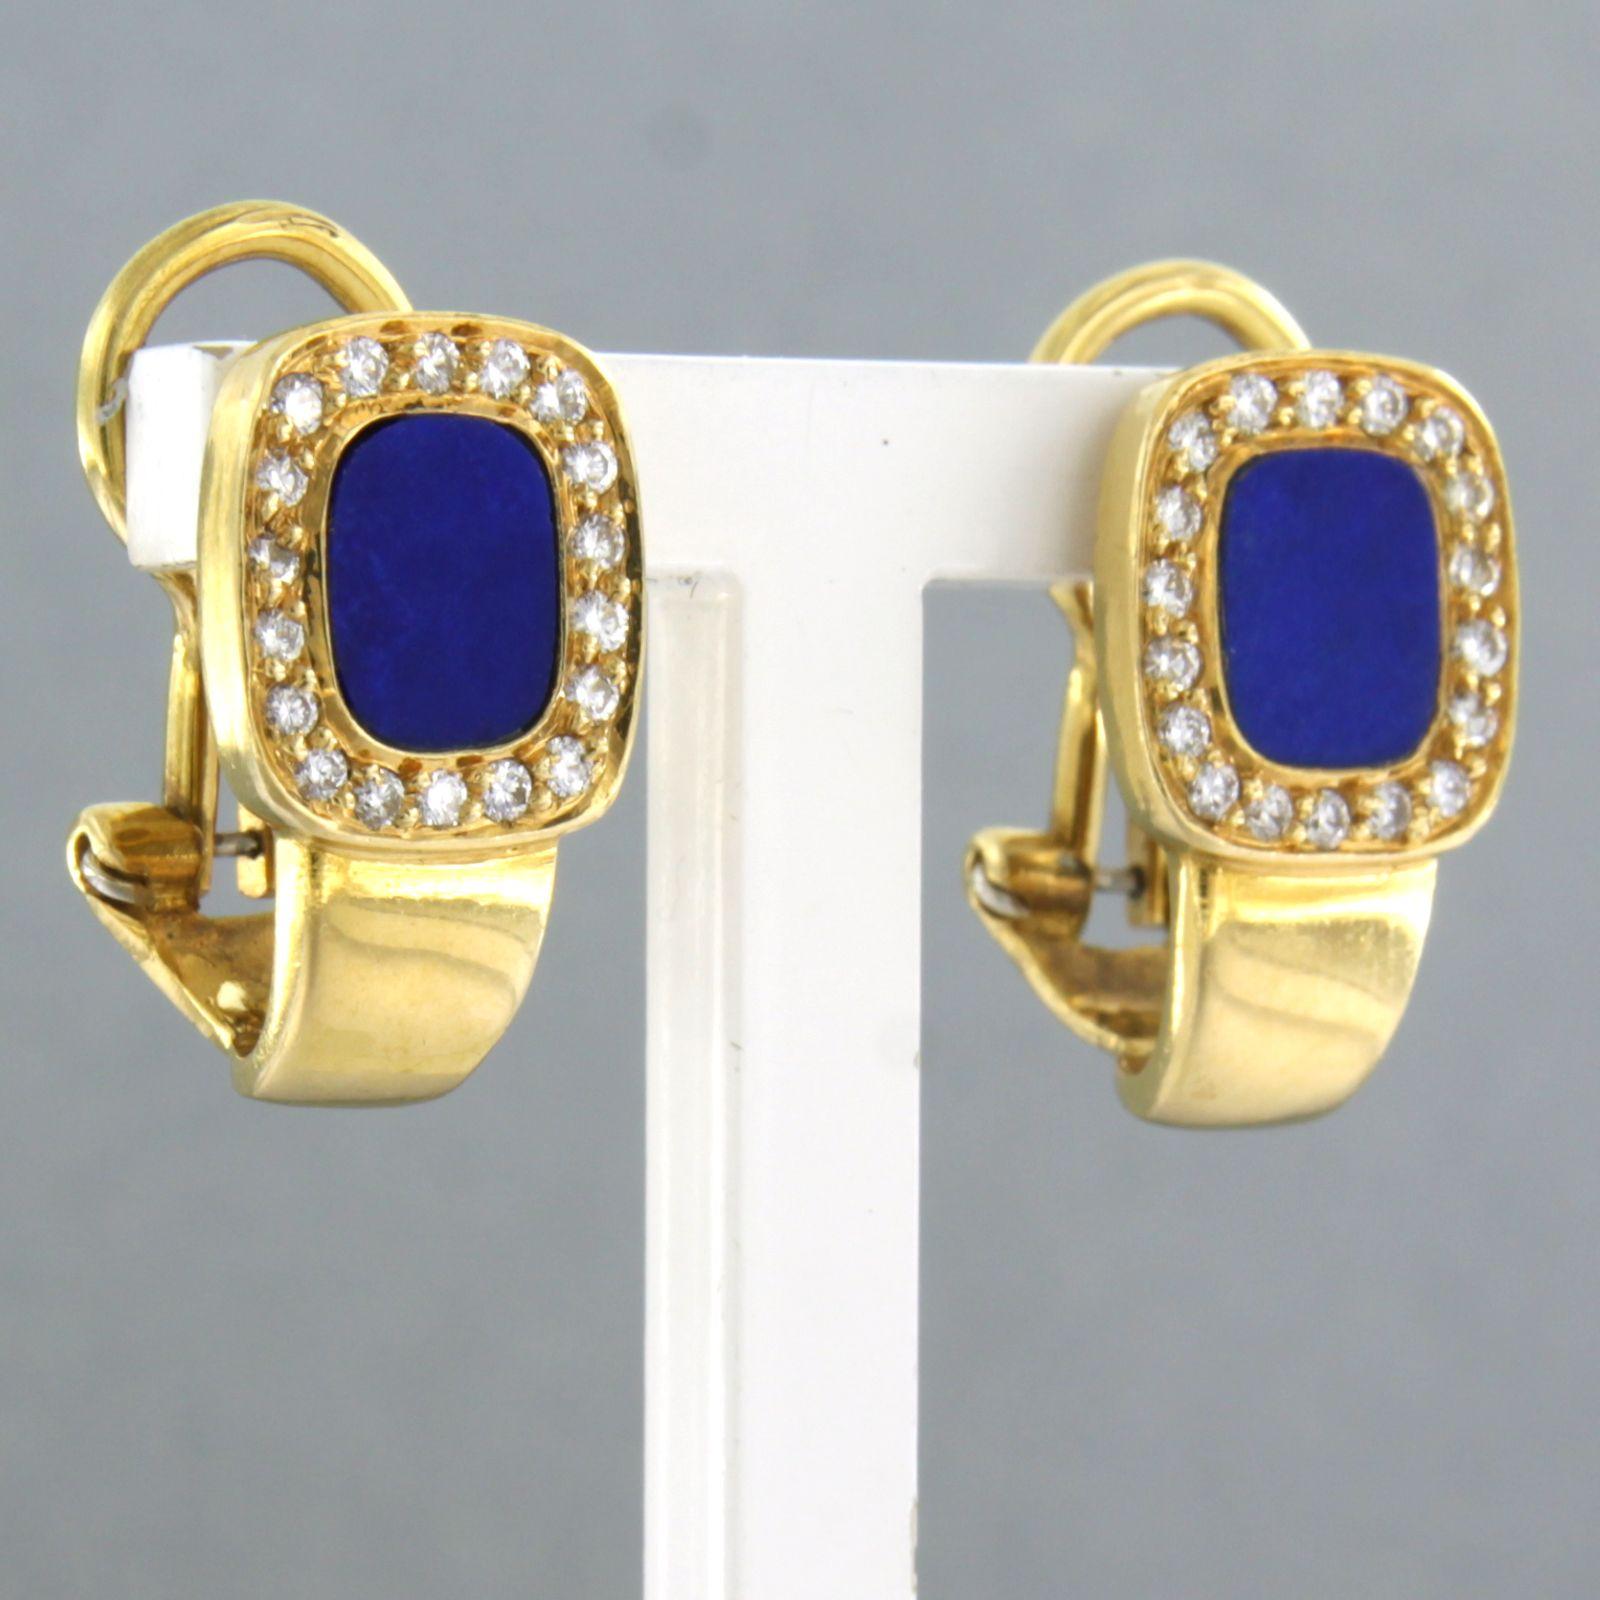 18k yellow gold ear clips set with lapis lazuli and brilliant cut diamonds up to 0.36ct - F/G – VS/SI

Detailed description:

the size of the ear clip is 1.7 cm long by 9.9 mm wide

Total weight 8.9 grams

set with

- 2 x 6.6 mm x 5.5 mm emerald